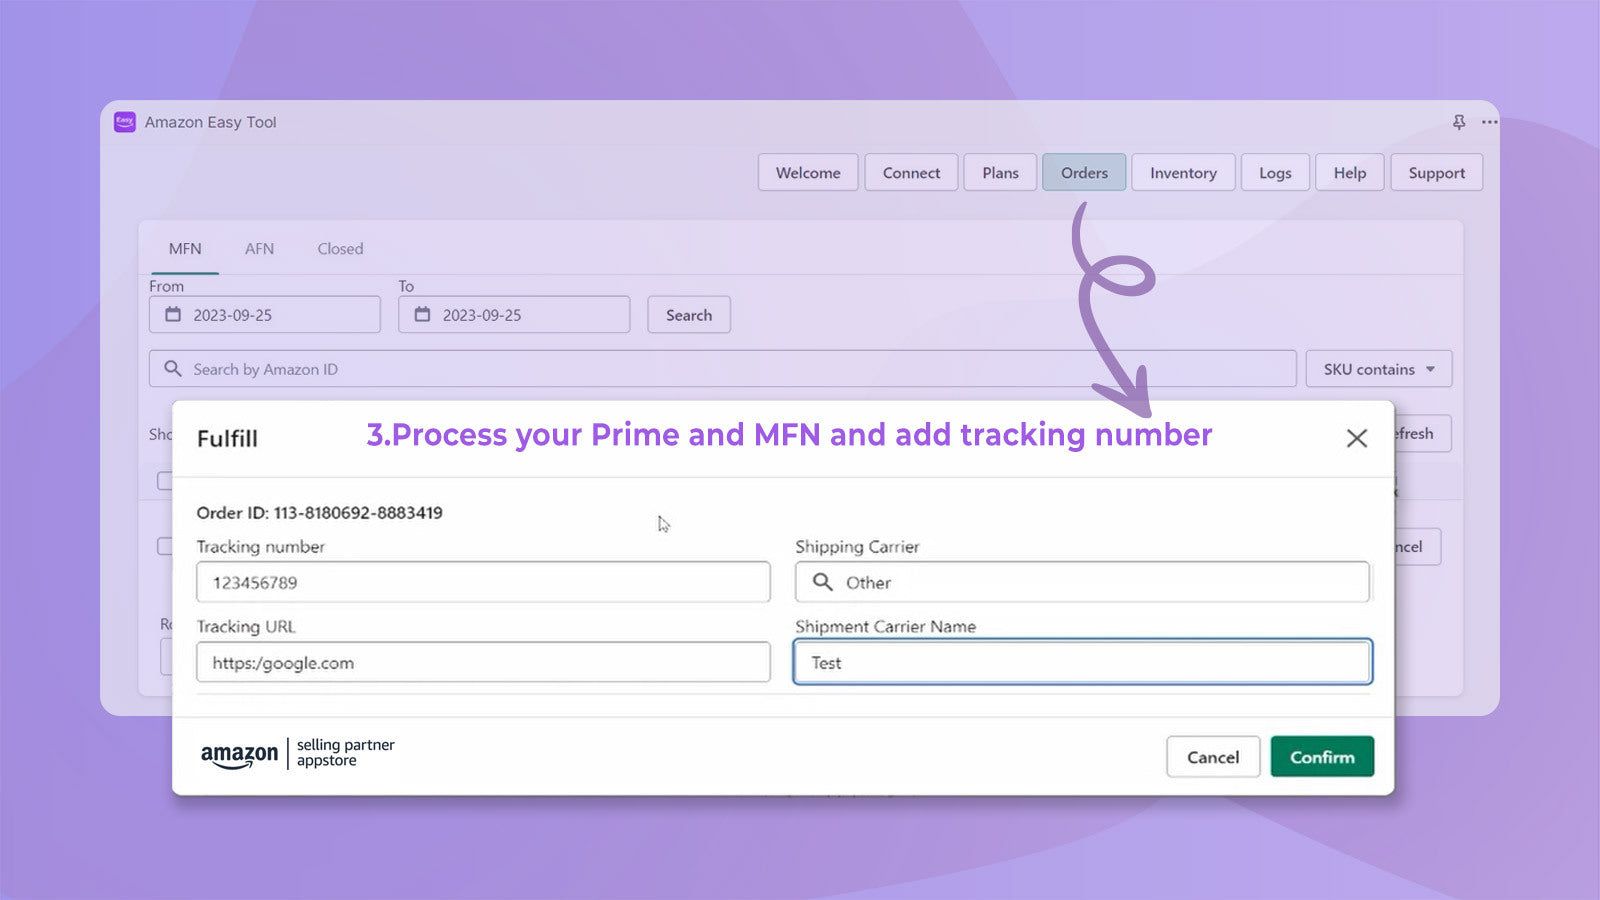 Process your Prime and MFN and add tracking number